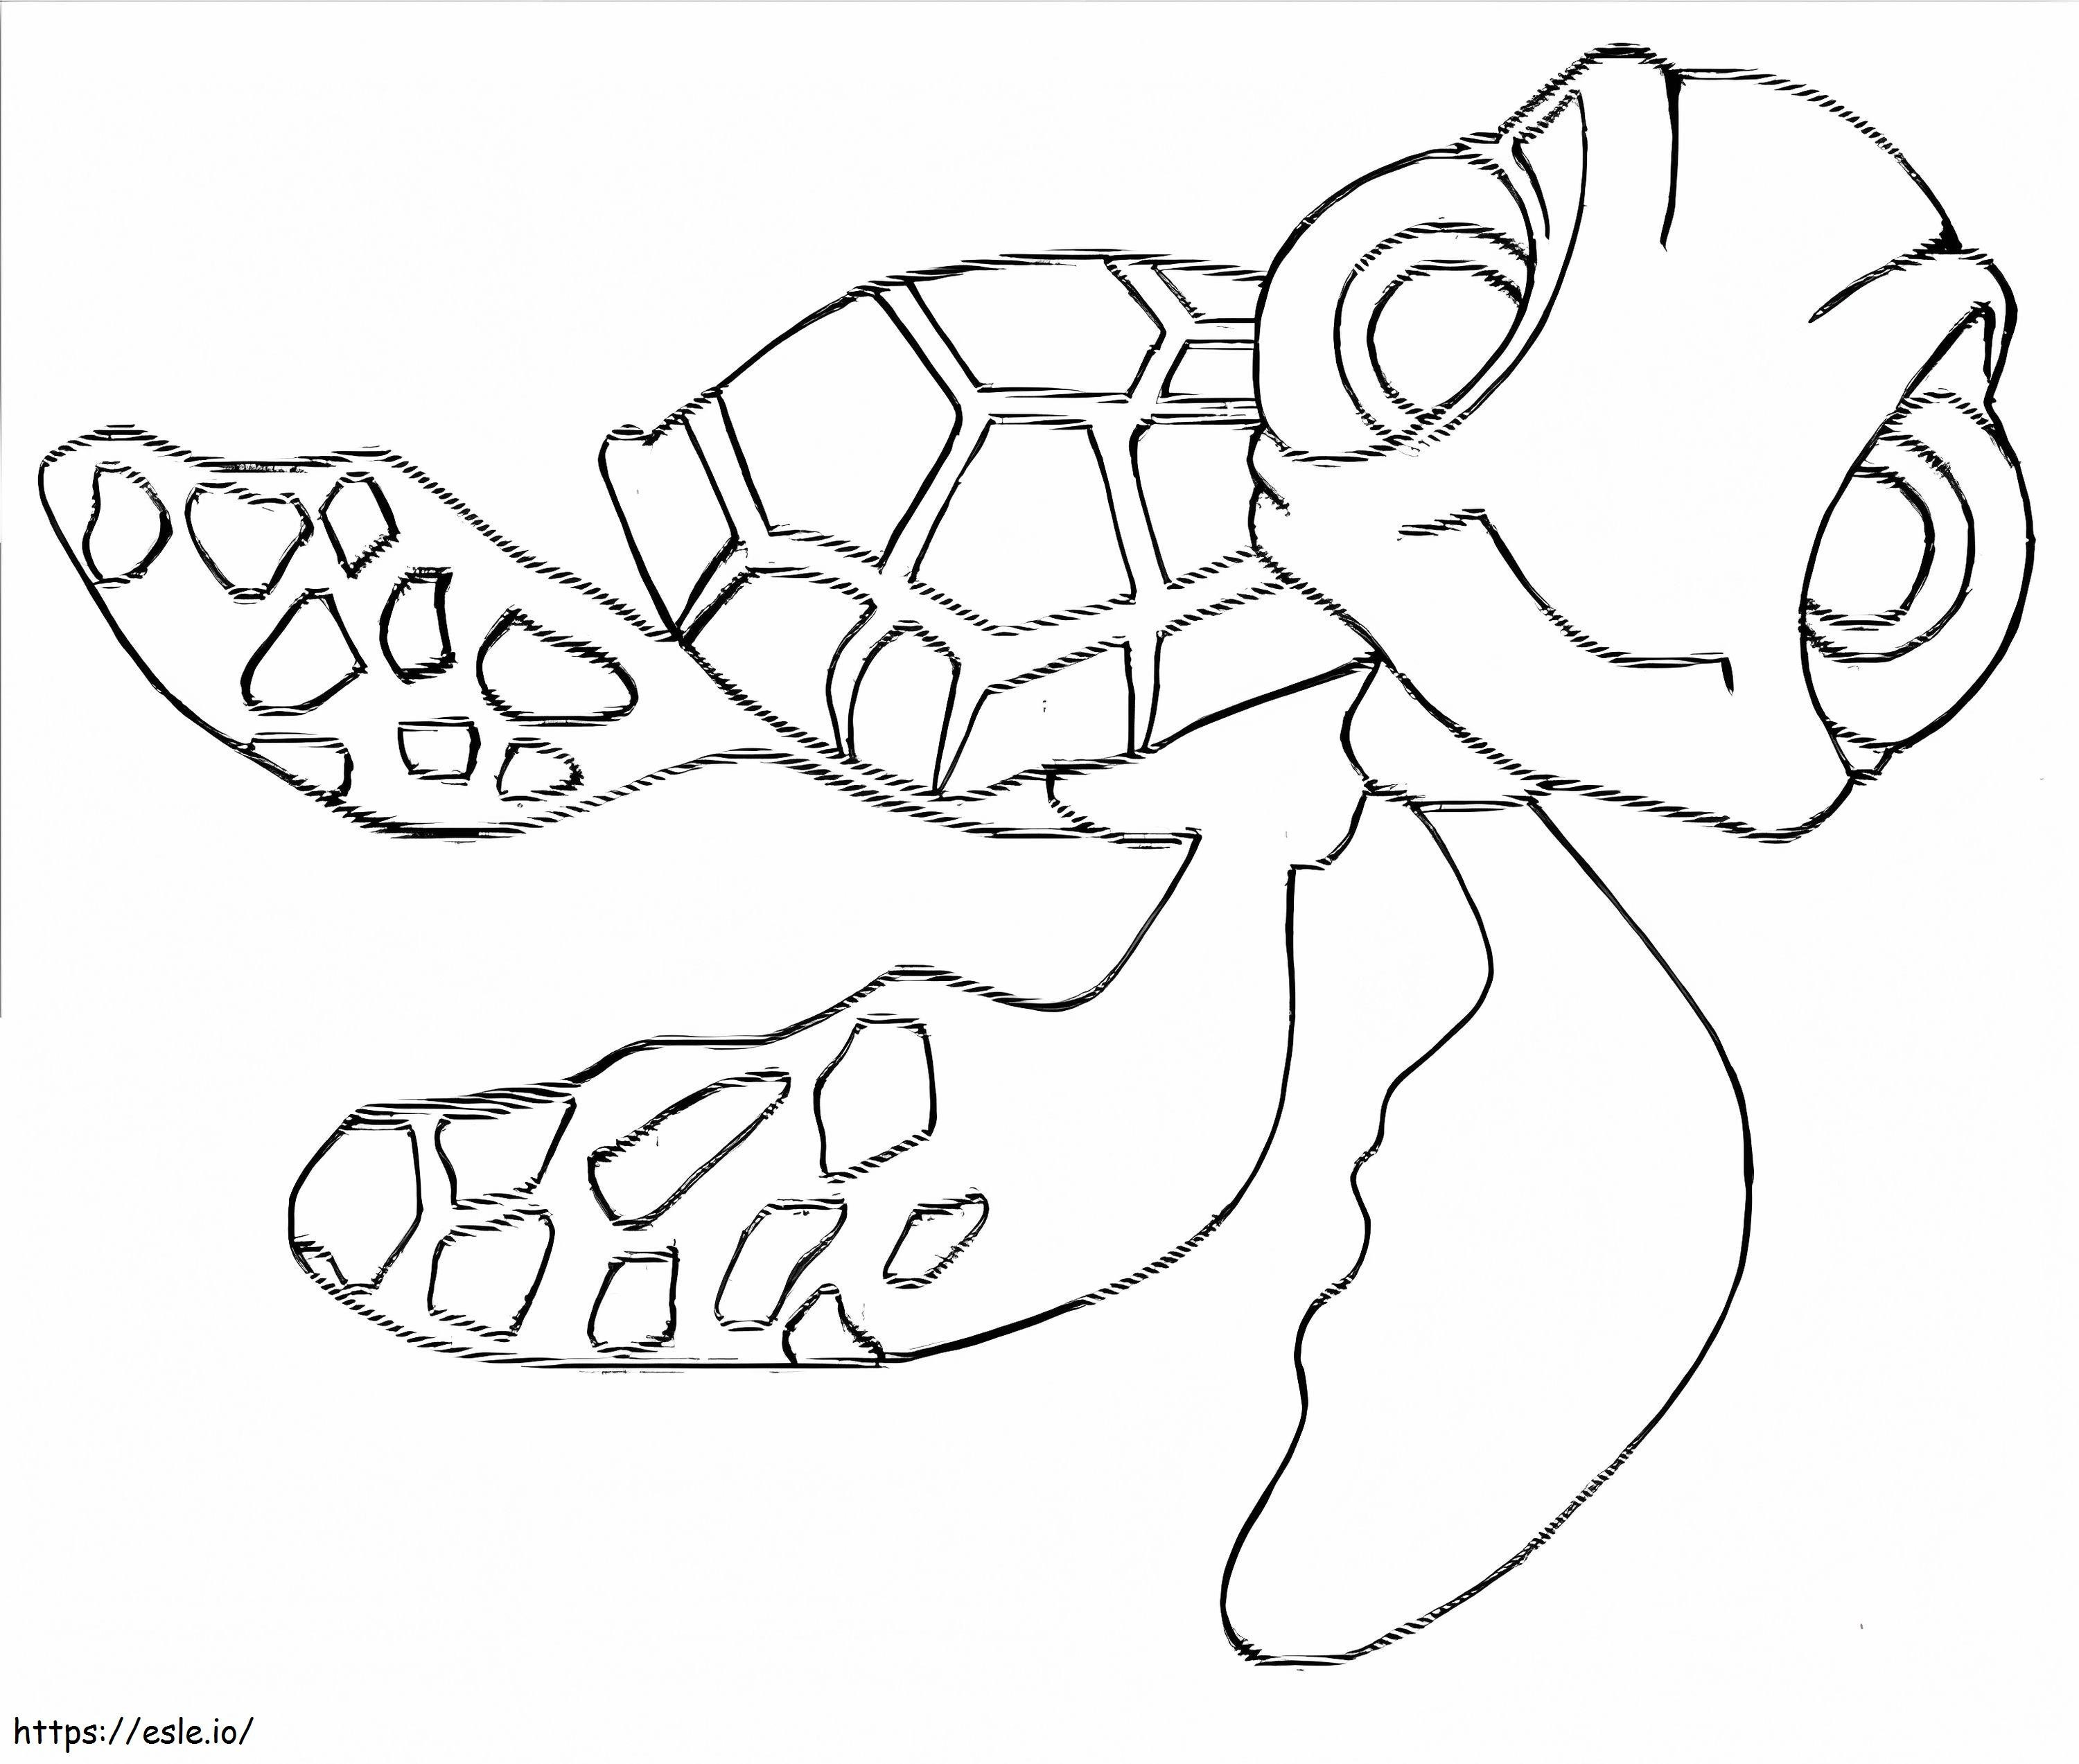 Squirt Finding Nemo coloring page